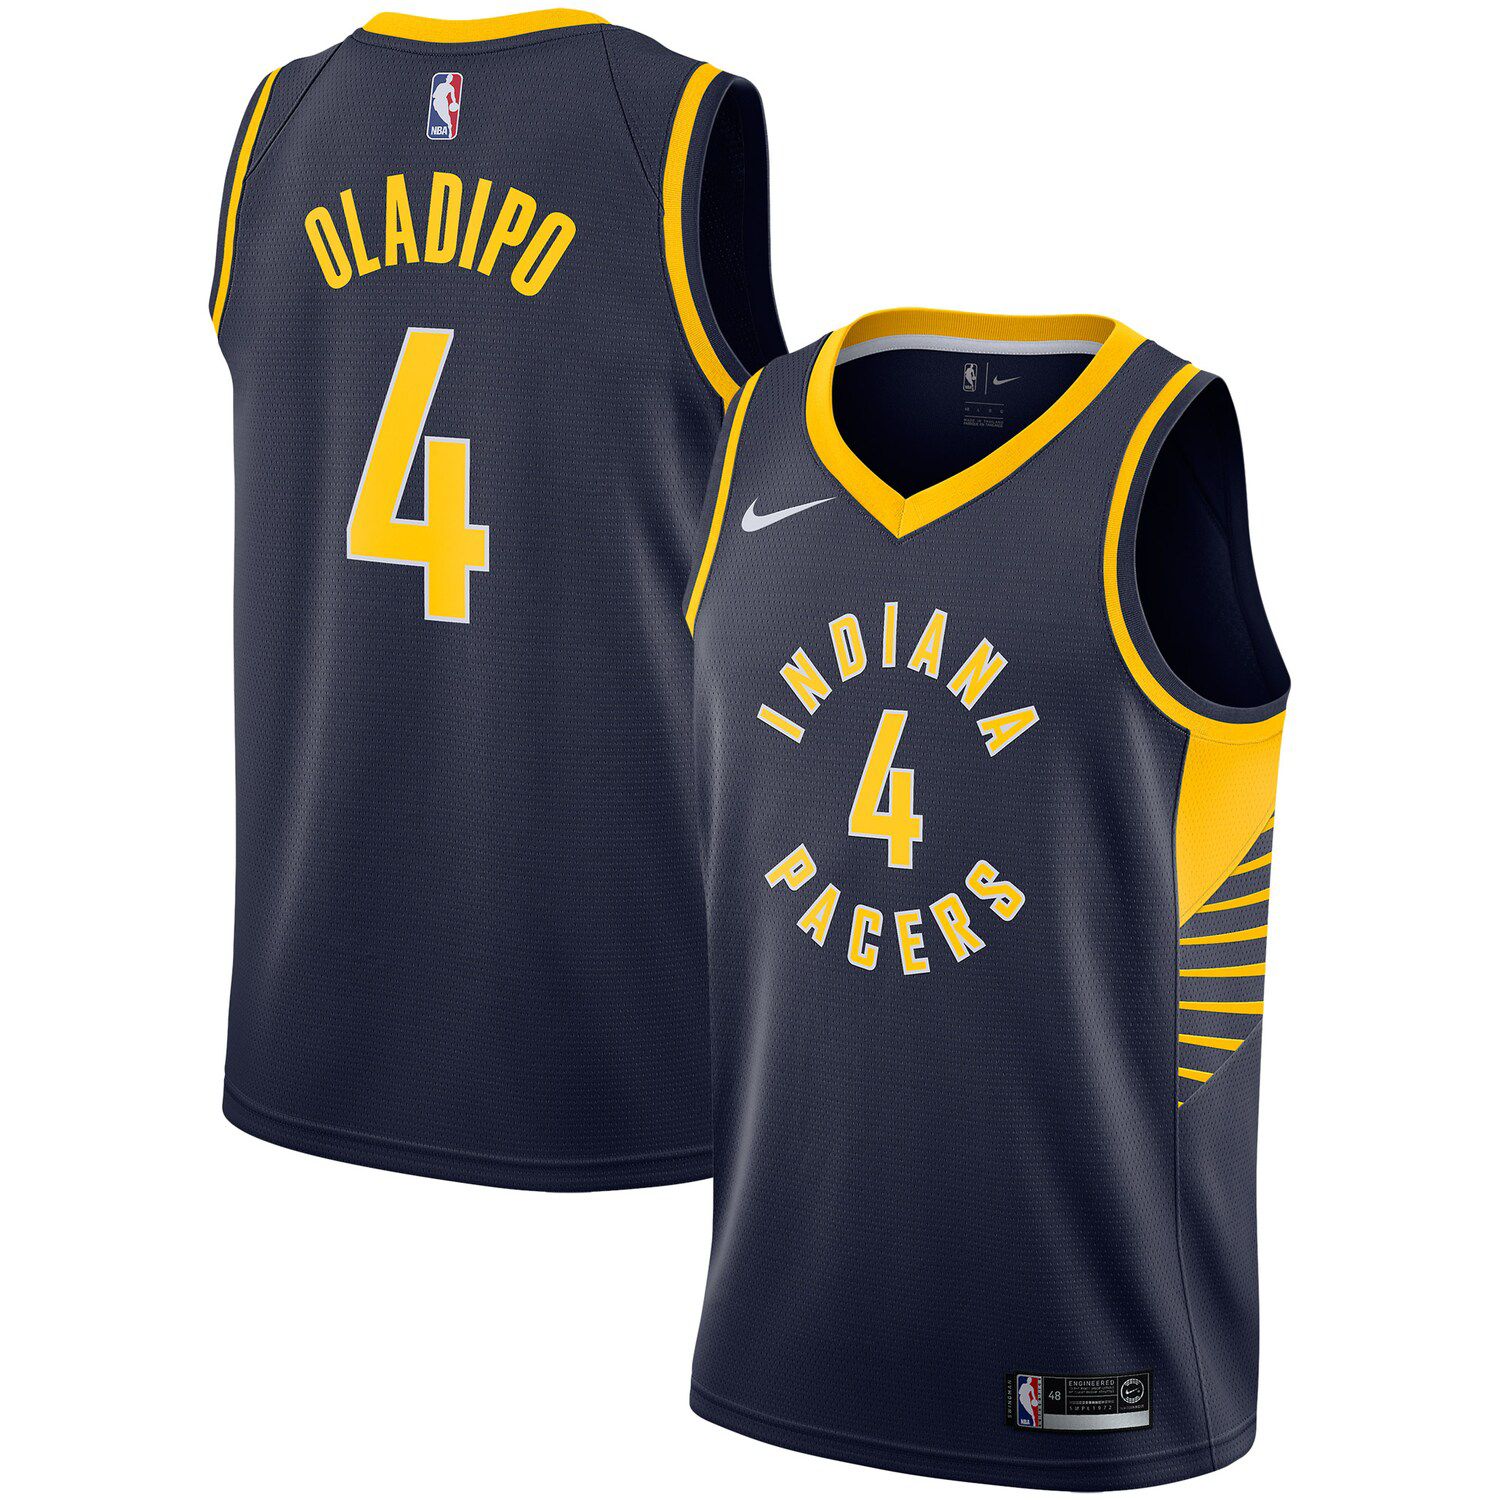 pacers nike jersey